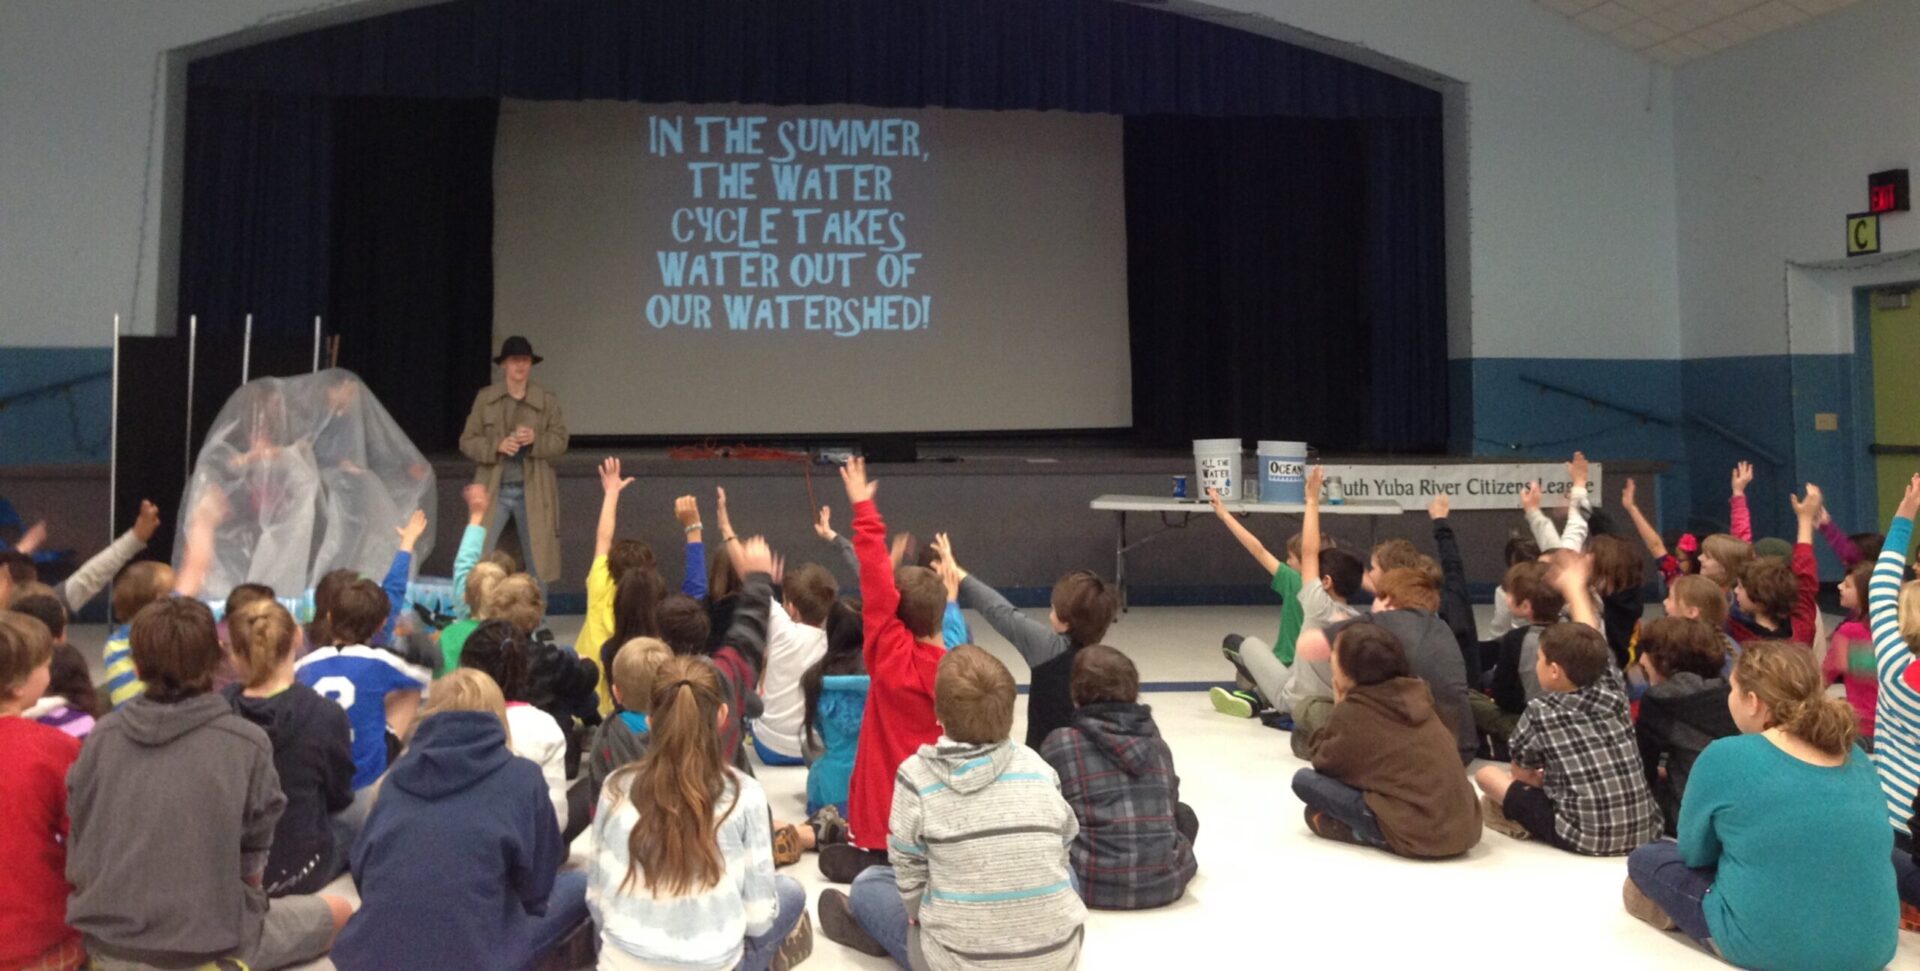 Conserving water takes a watershed!